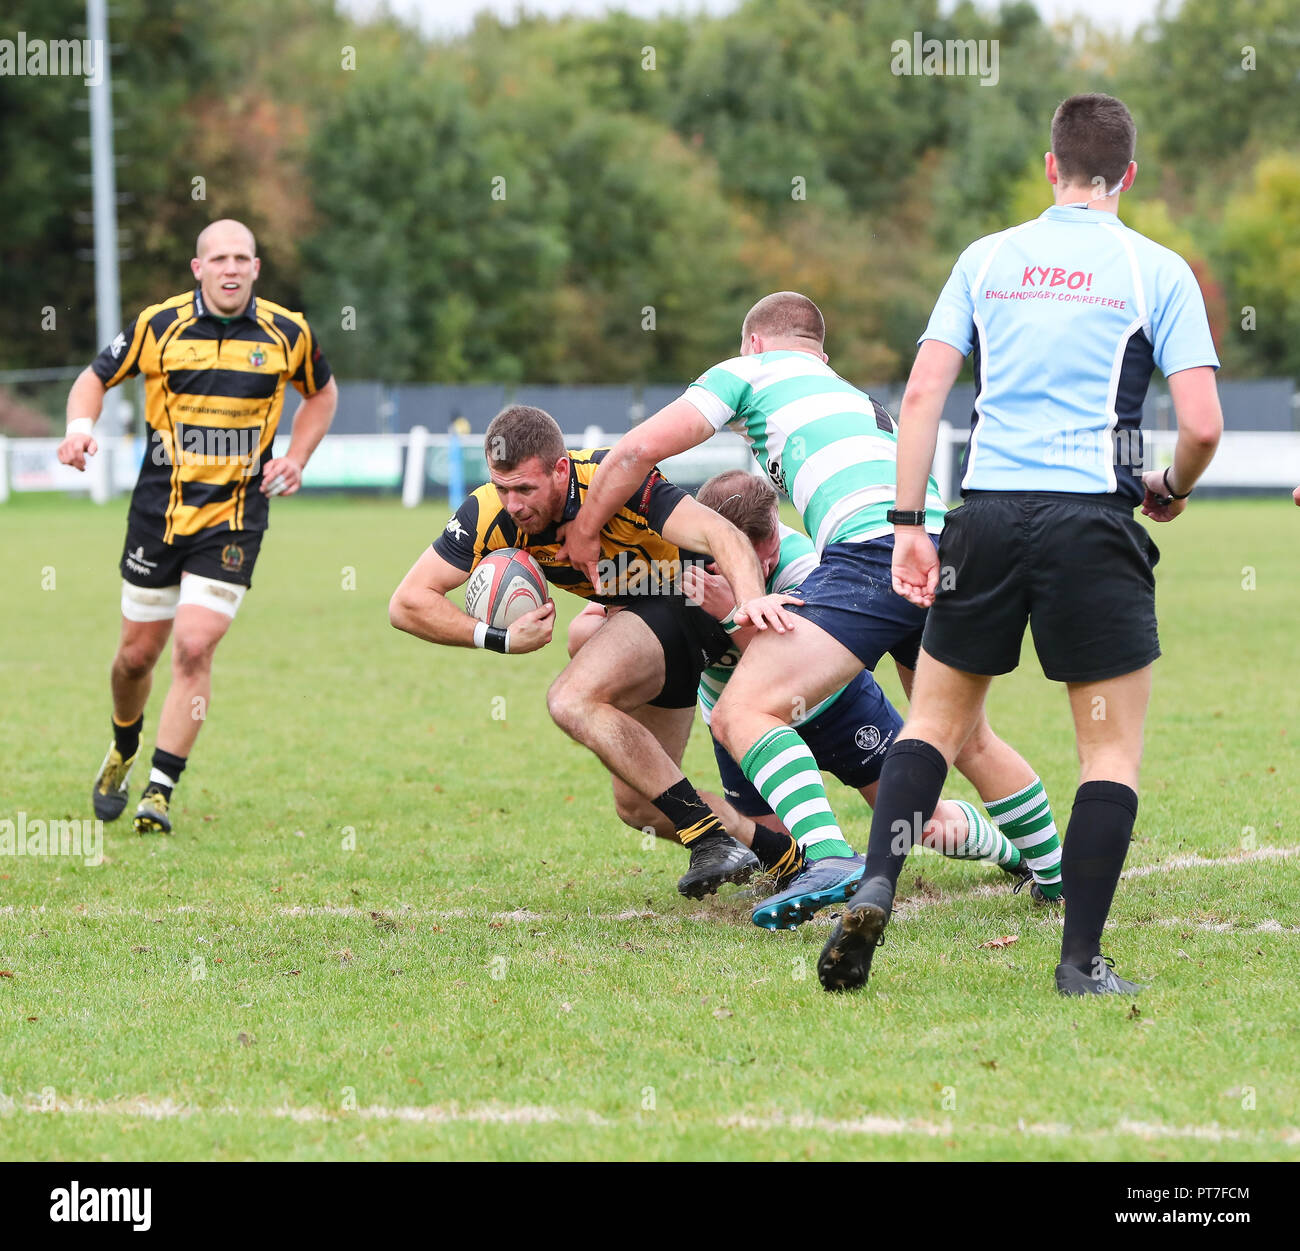 Leicester, England. Rugby Union, Hinckley rfc v South Leicester rfc.   Man of the Match Mitch Lamb scores after 26 minutes for Hinckley during the RFU National League 2 North (NL2N) game played at the Leicester  Road Stadium.  © Phil Hutchinson / Alamy Live News Stock Photo